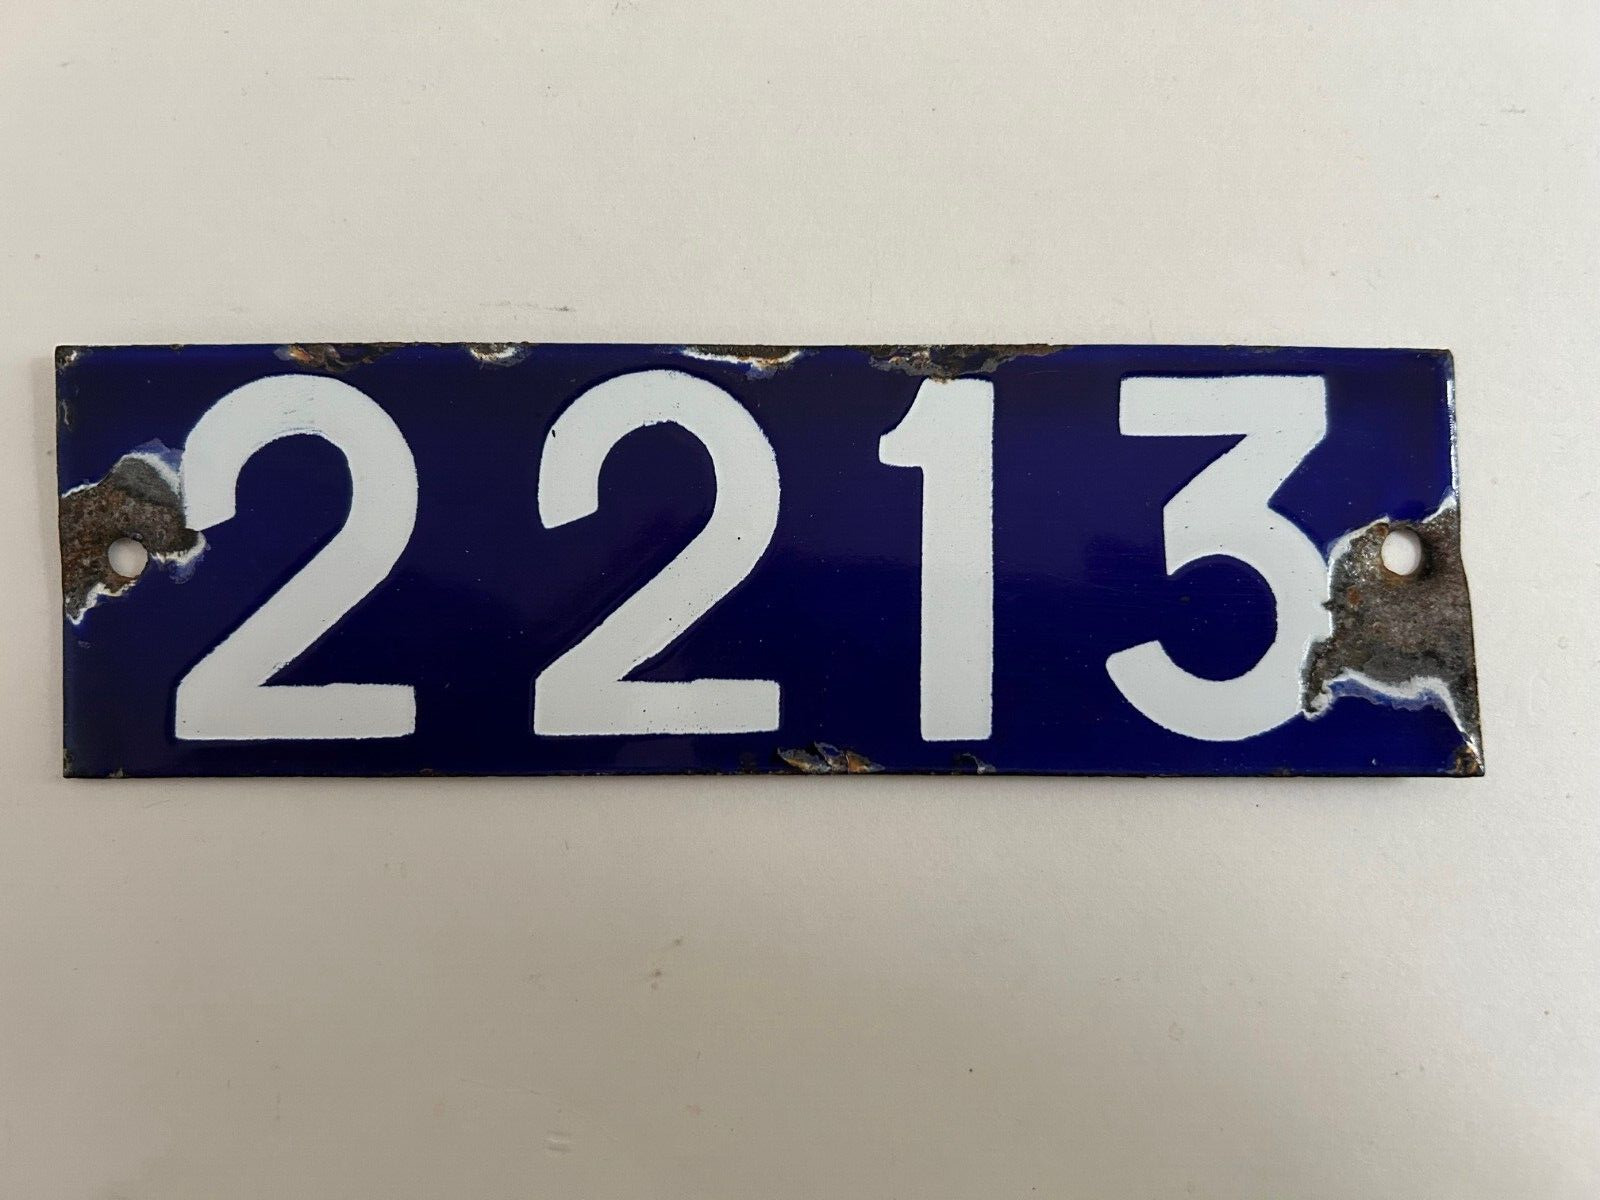 1910s 1920s Small Porcelain Number Sign (License Plate?)  #2213 Made in Burma